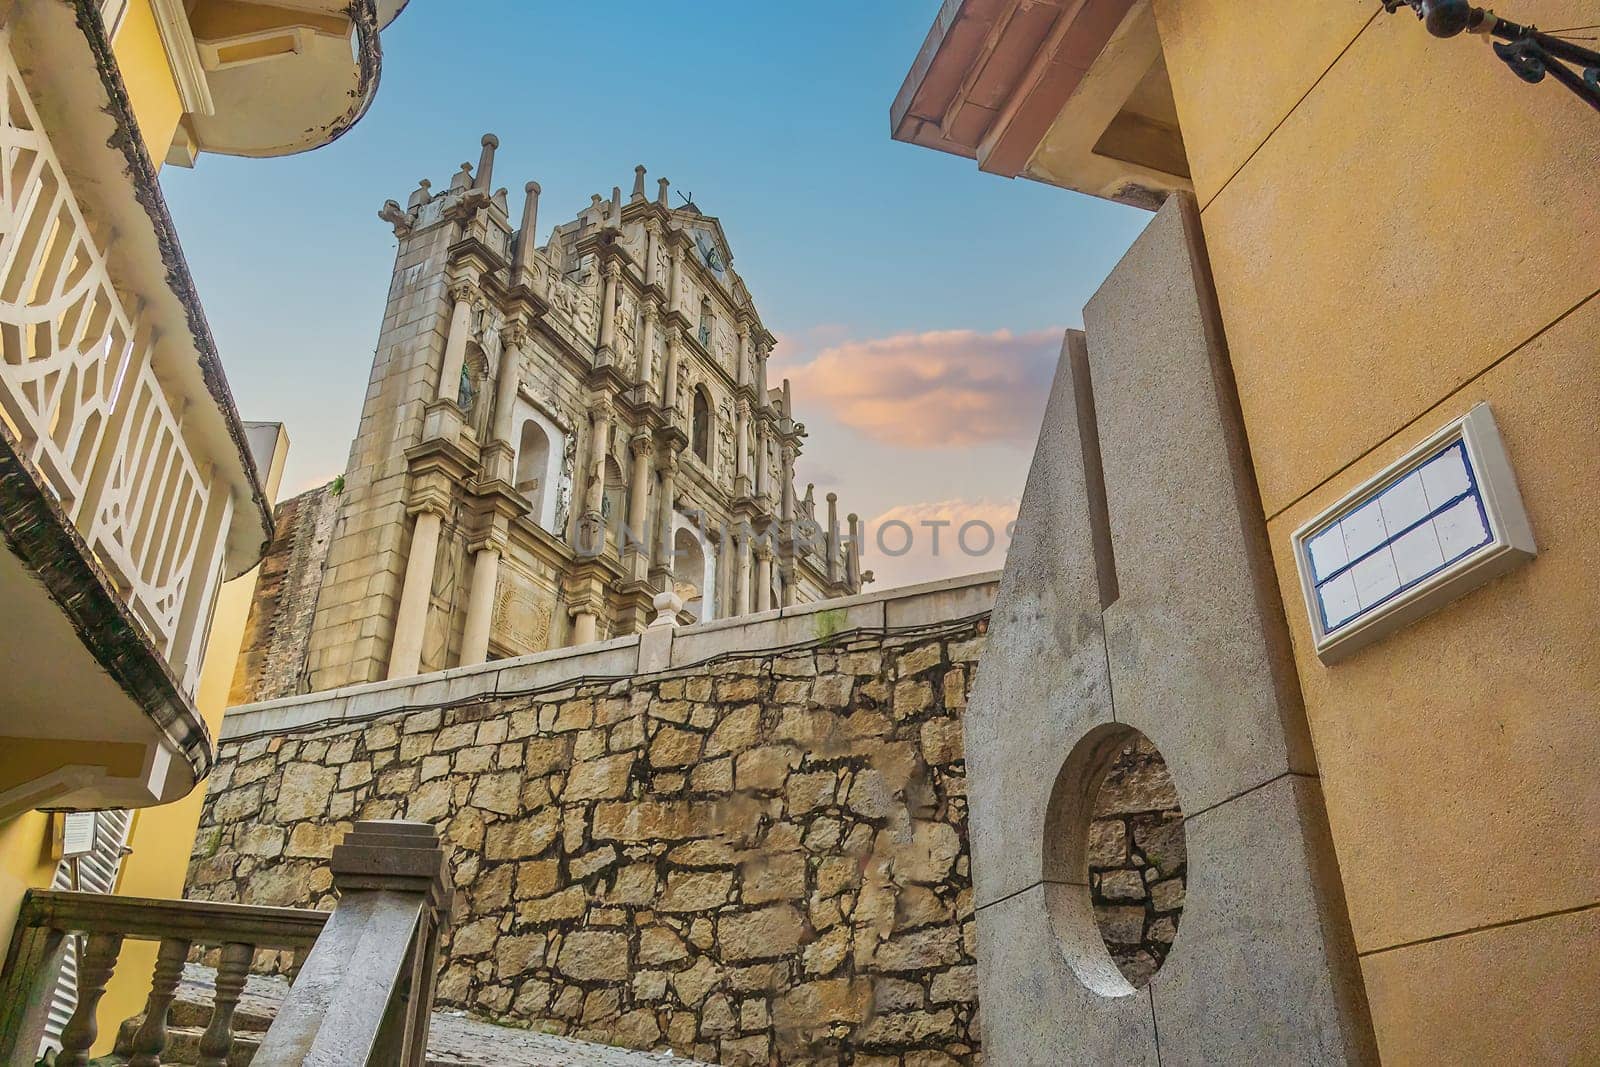 Ruins Of Saint Paul's Cathedral in downtown Macau at sunrise